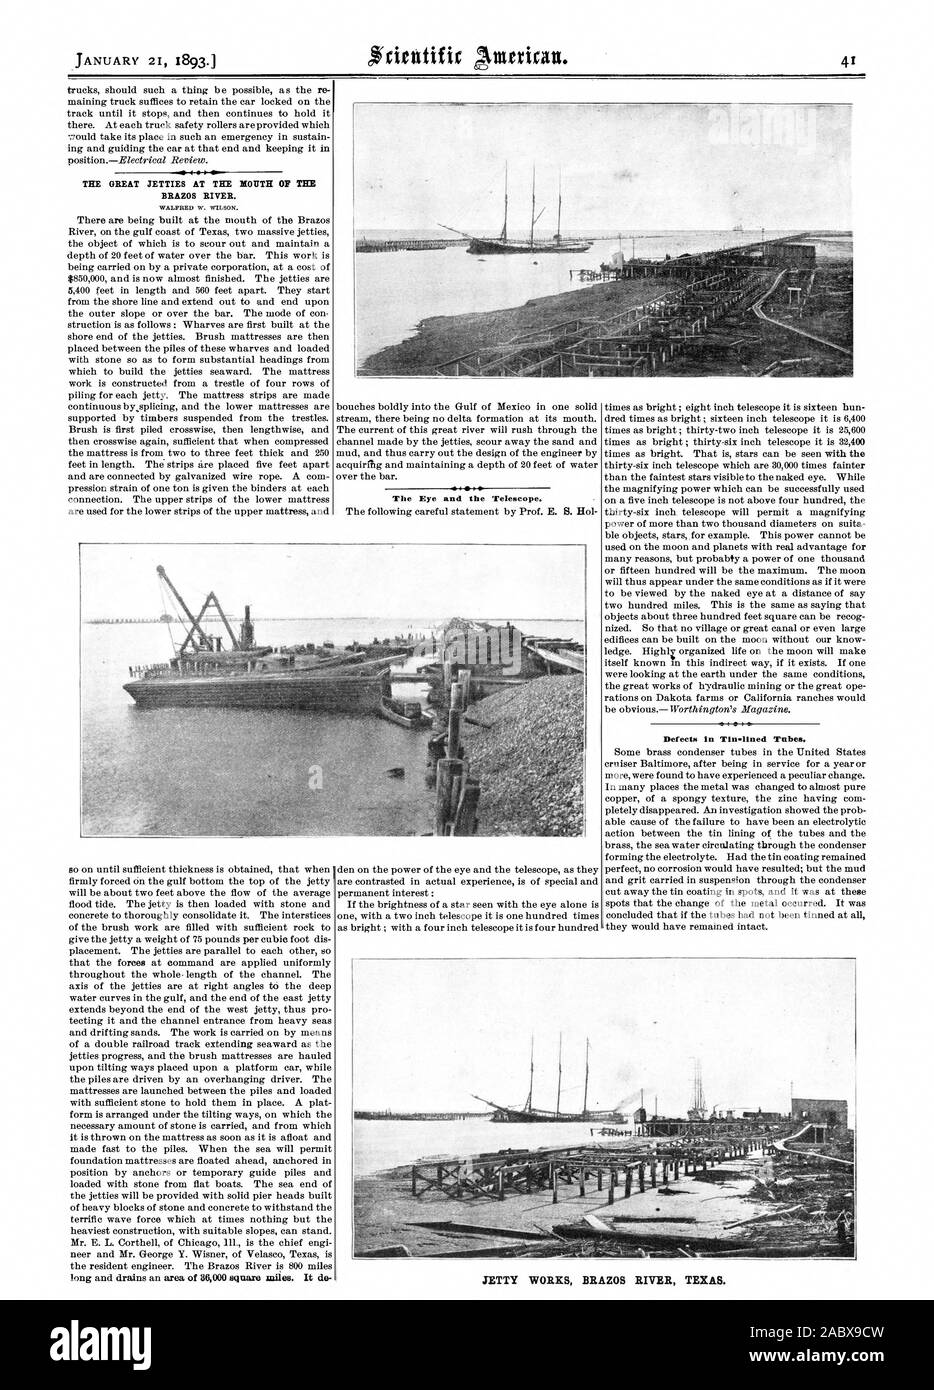 BRAZOS RIVER. The Eye and the Telescope. Defects in Tin-lined Tubes. JETTY WORKS BRAZOS RIVER TEXAS., scientific american, 1893-01-21 Stock Photo